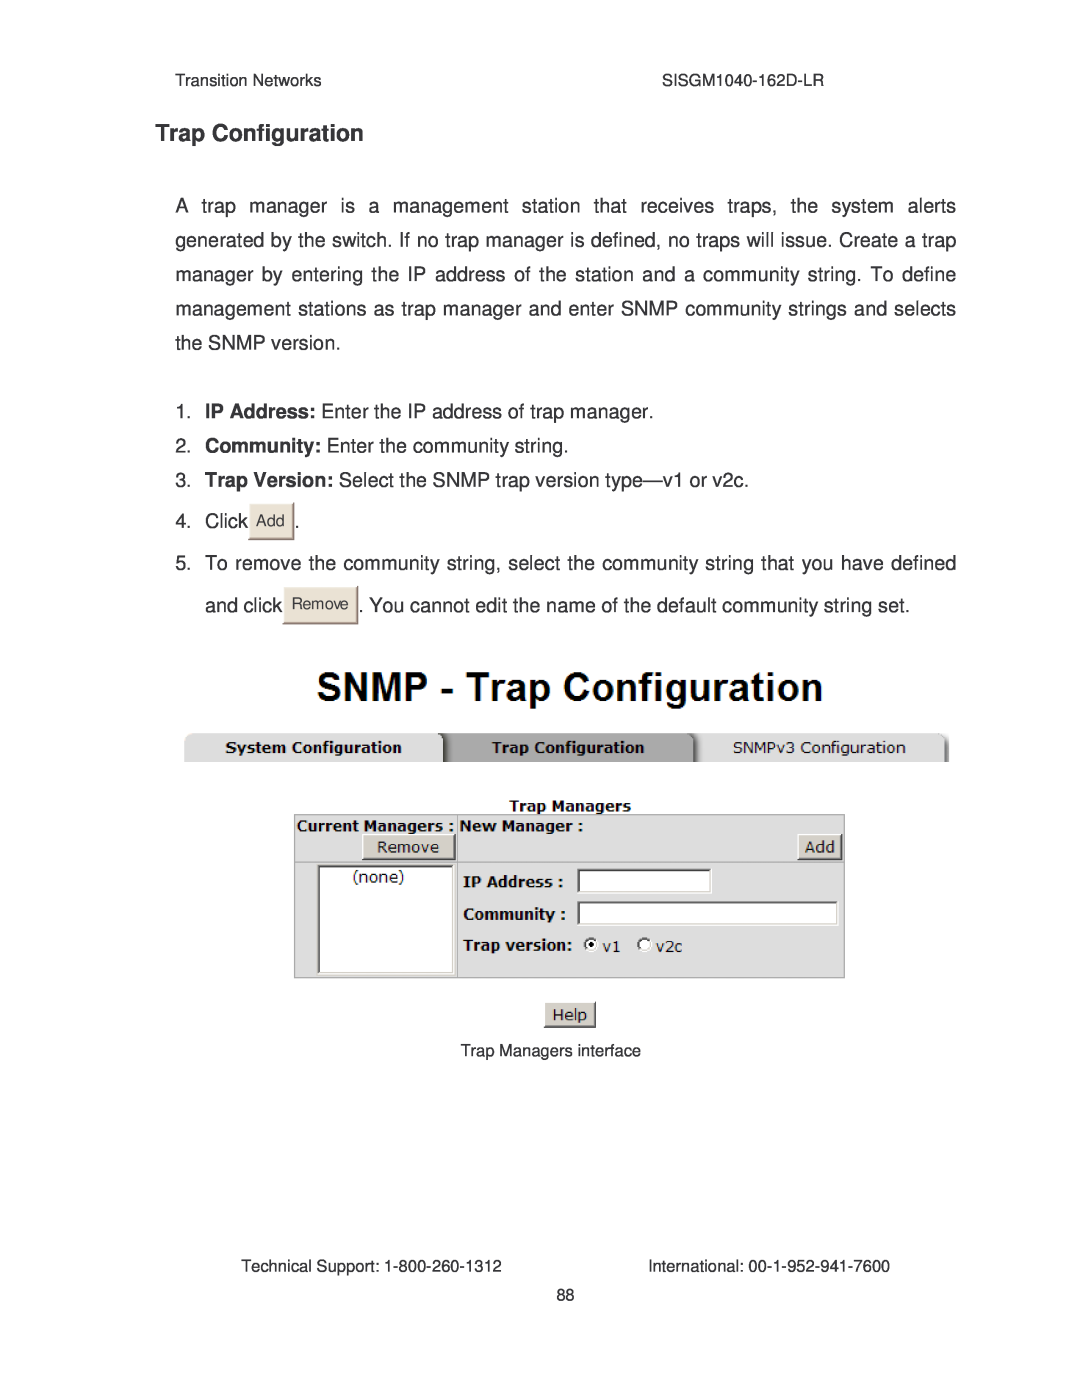 Transition Networks SISGM1040-162D manual Trap Configuration 